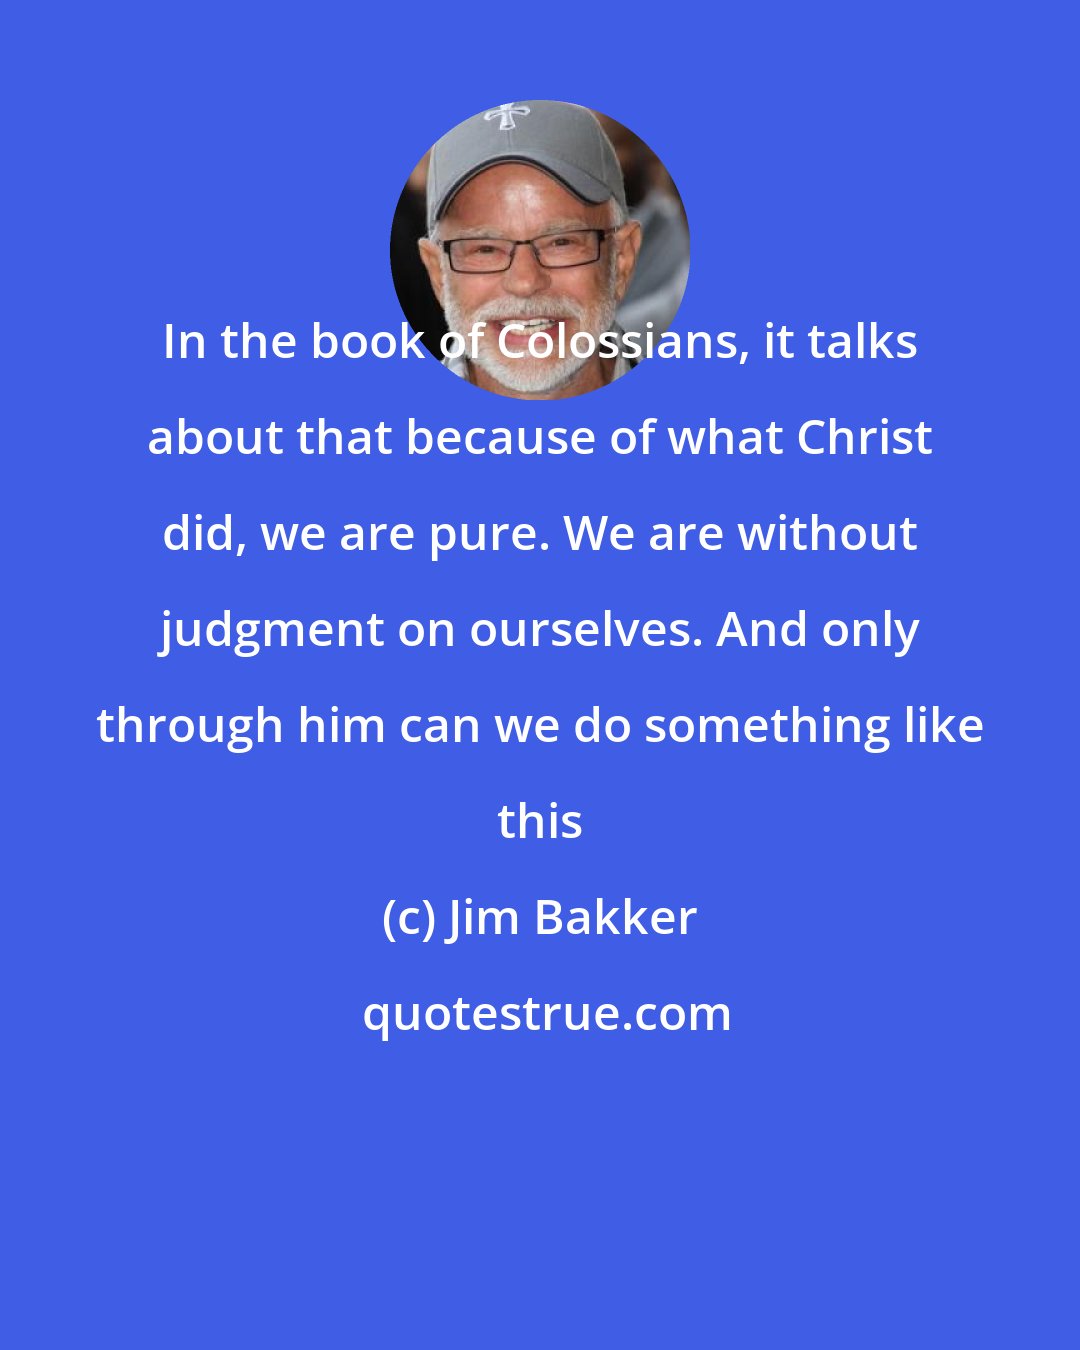 Jim Bakker: In the book of Colossians, it talks about that because of what Christ did, we are pure. We are without judgment on ourselves. And only through him can we do something like this